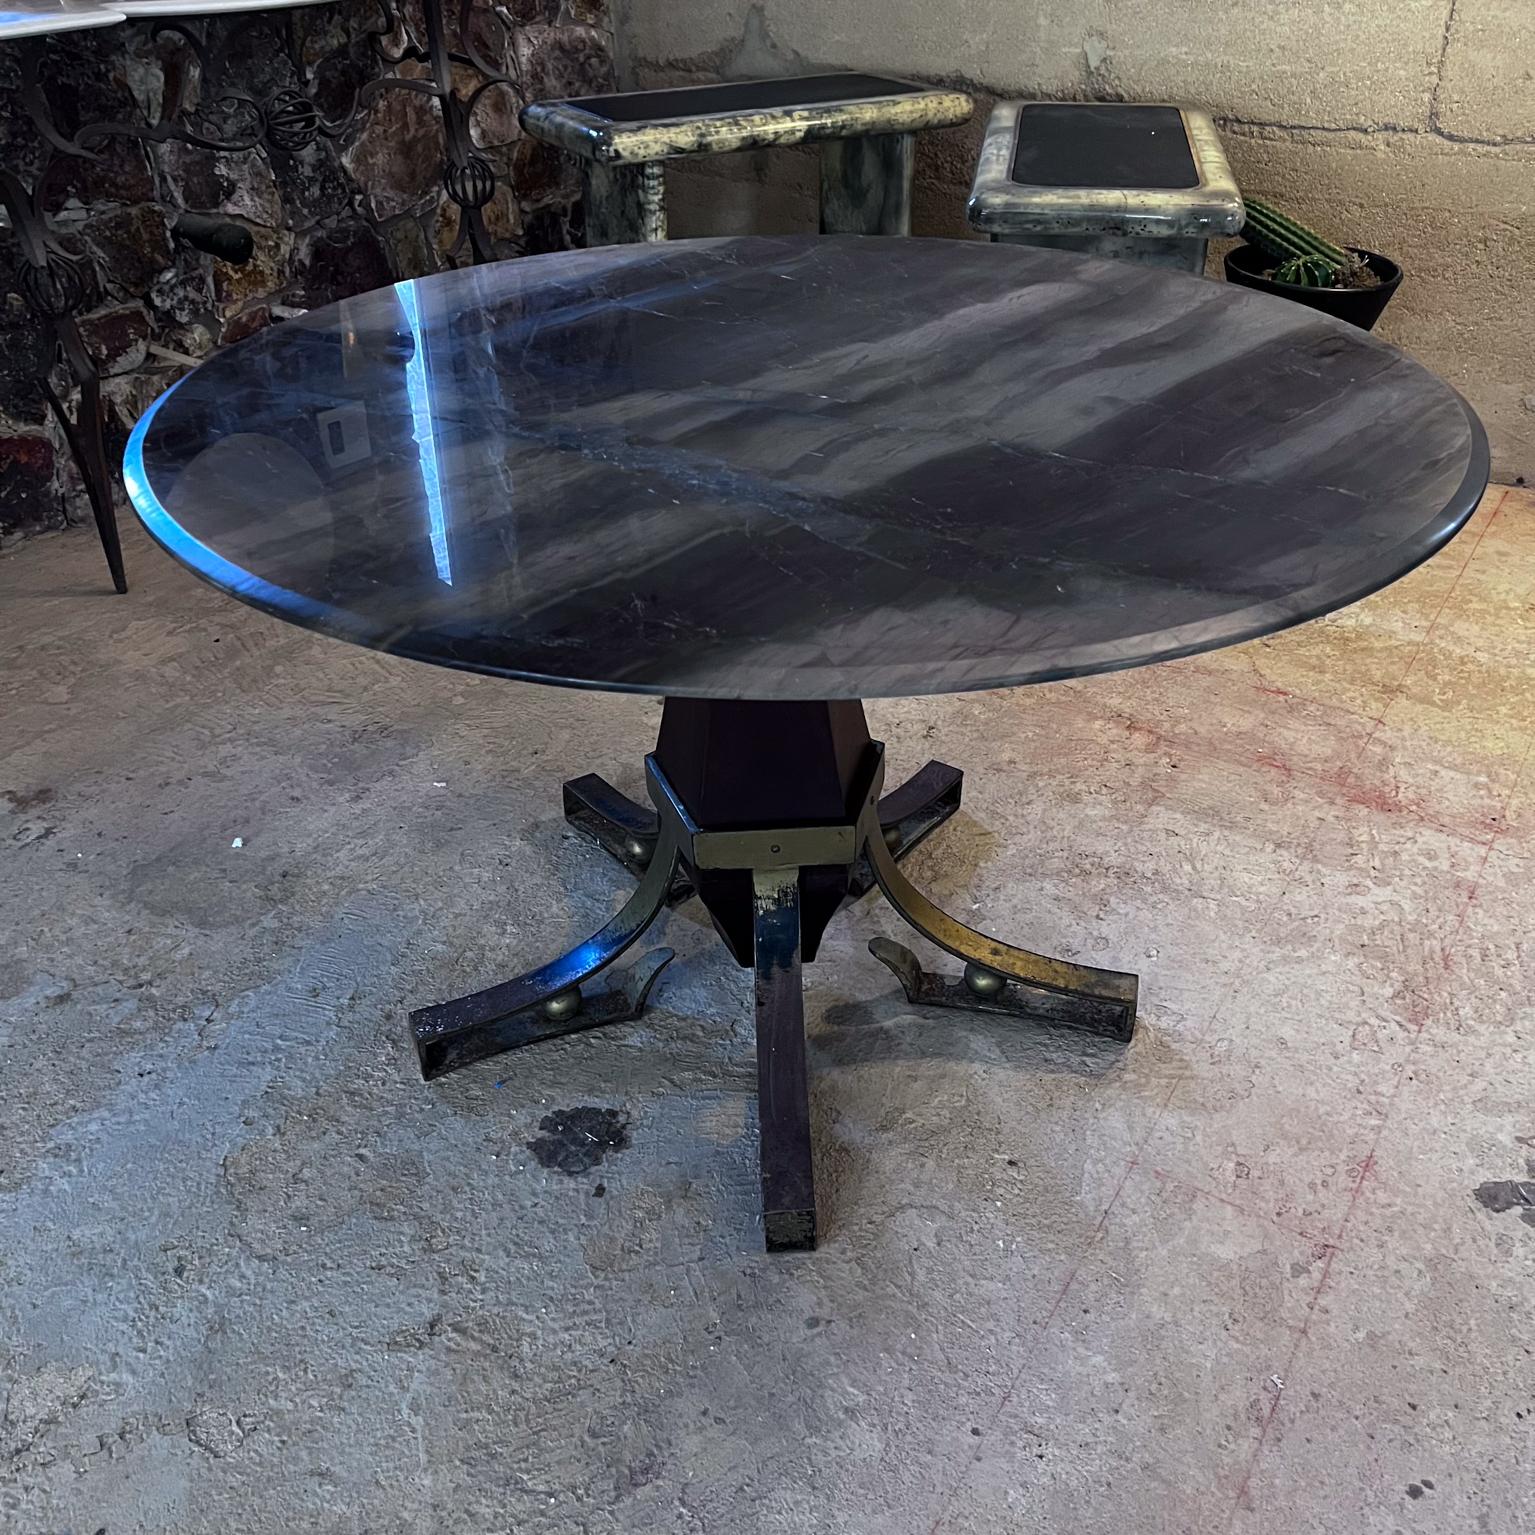 1950s Arturo Pani Forged Iron Mahogany Marble Dining Table Mexico City For Sale 4